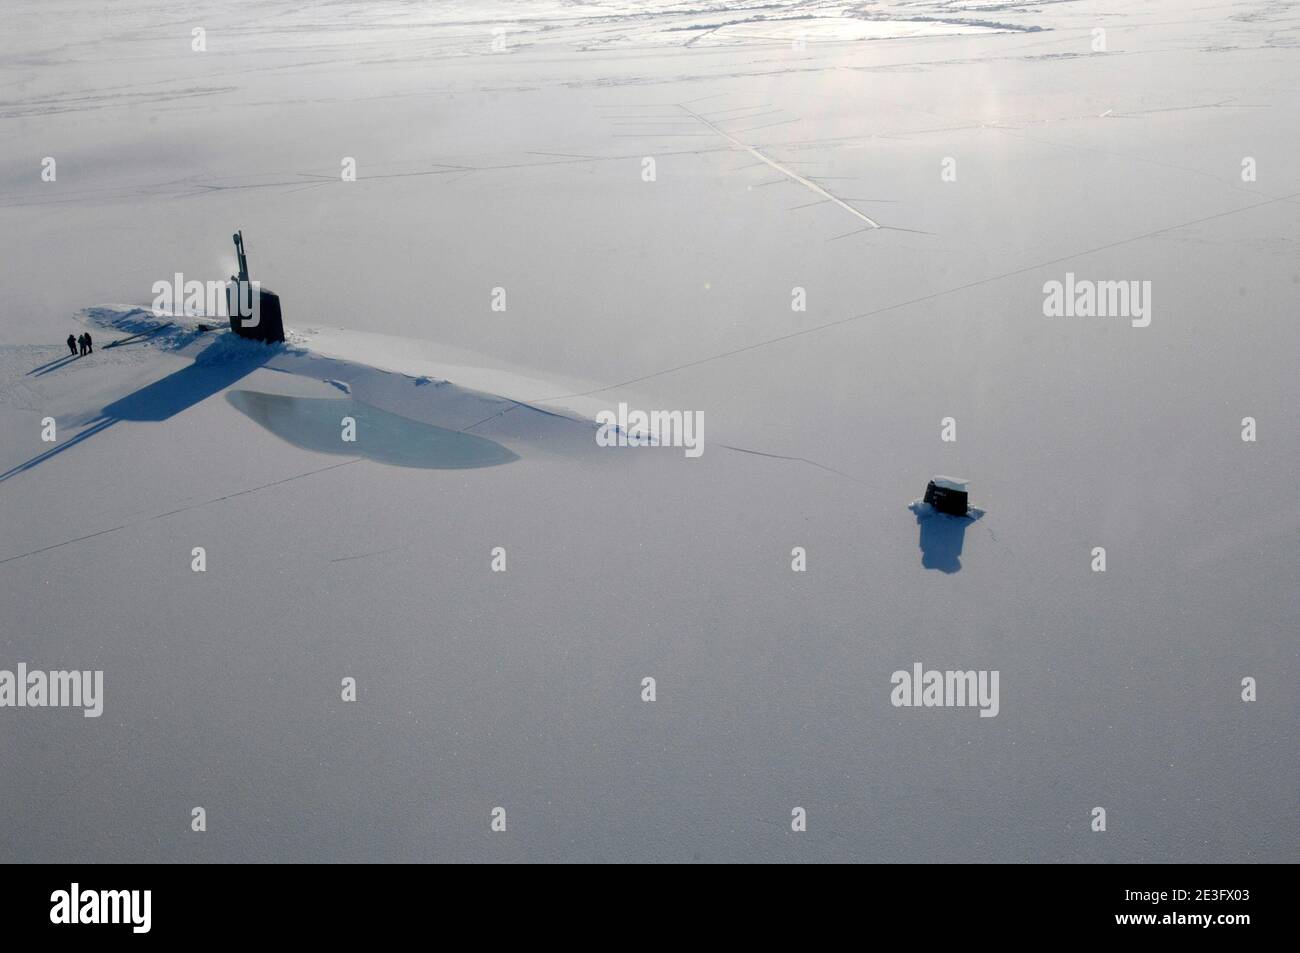 The Los Angeles-class submarine USS Annapolis is on the surface of the Arctic Ocean after breaking through three feet of ice during Ice Exercise (ICEX), on March 23, 2009. With the support from the University of Washington Applied Physics Laboratory, ICEX 2009 enables the Submarine Force to operate and train in the challenging and unique environment that characterizes the Arctic region. Photo by Tiffini M. Jones/USN via ABACAPRESS.COM Stock Photo